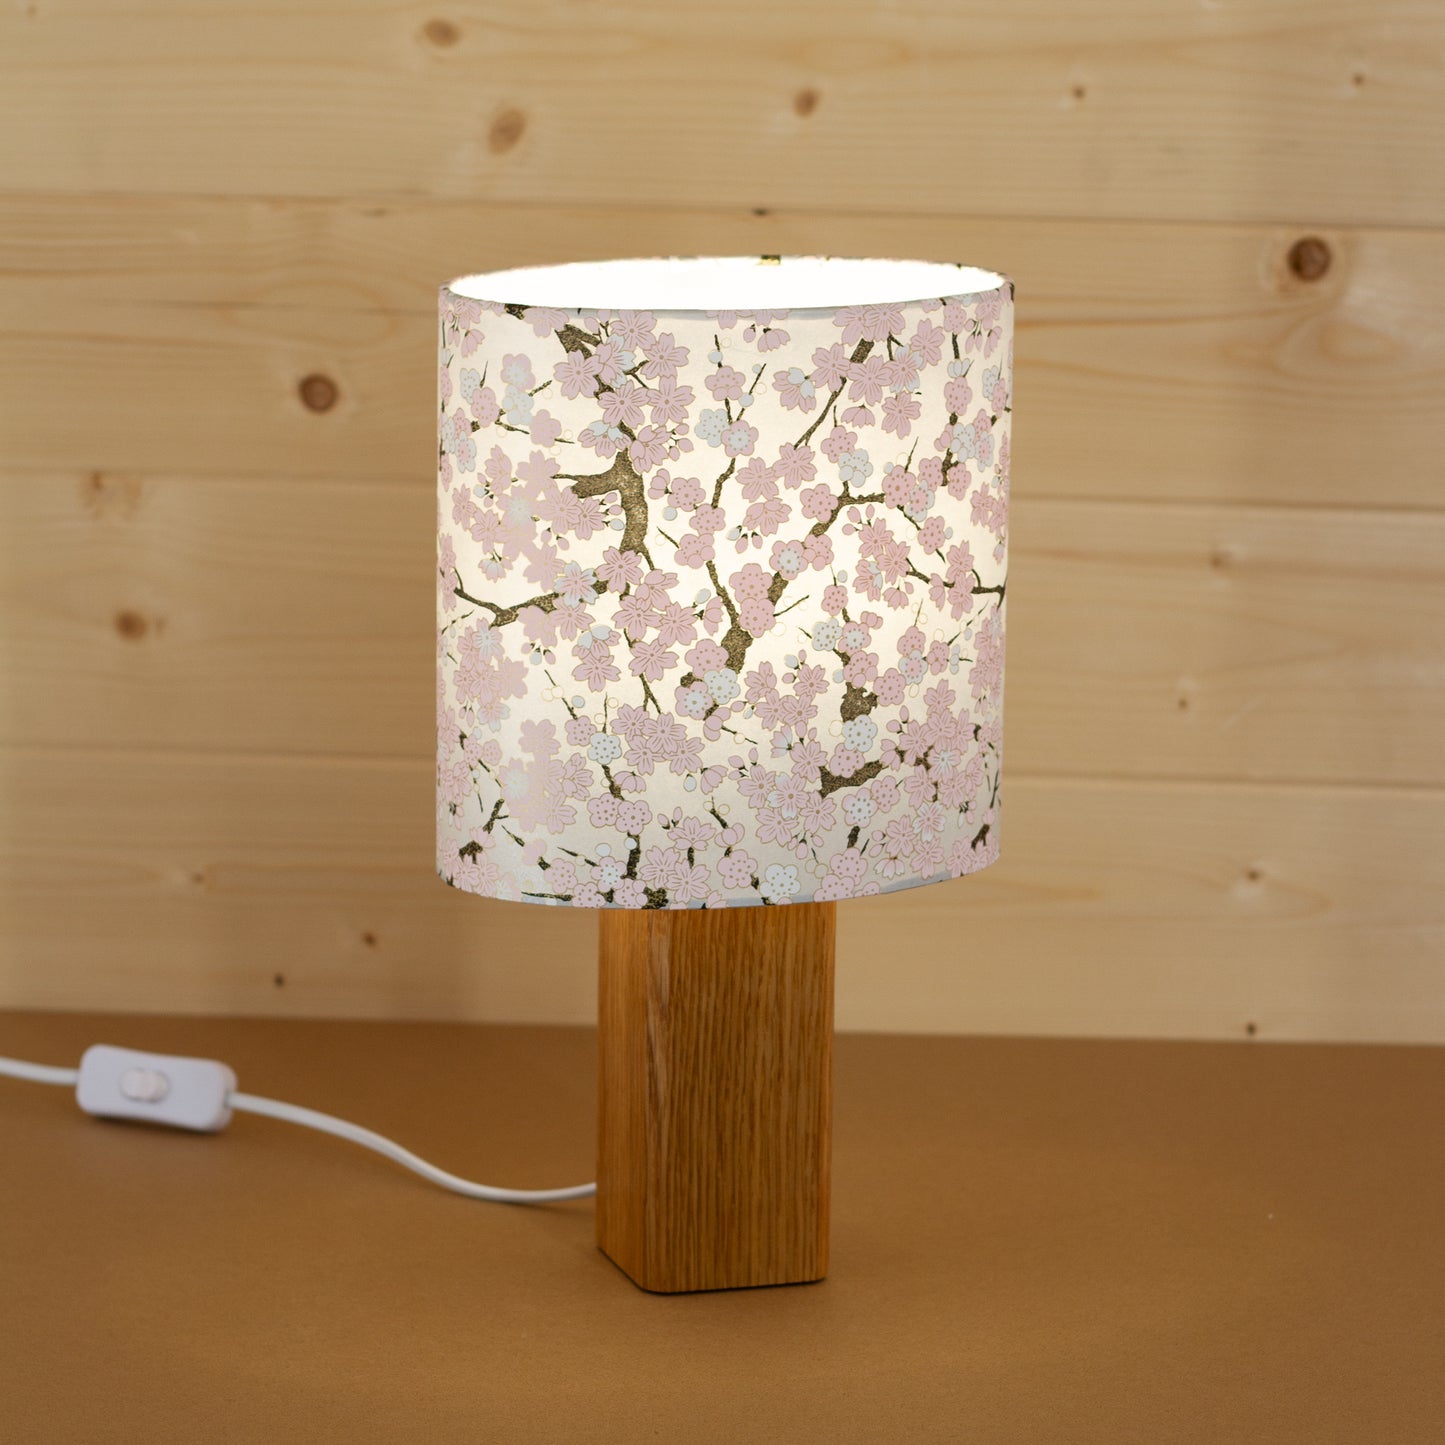 Square Oak Table Lamp with 20cm Oval Lamp Shade W02 ~ Pink Cherry Blossom on Grey